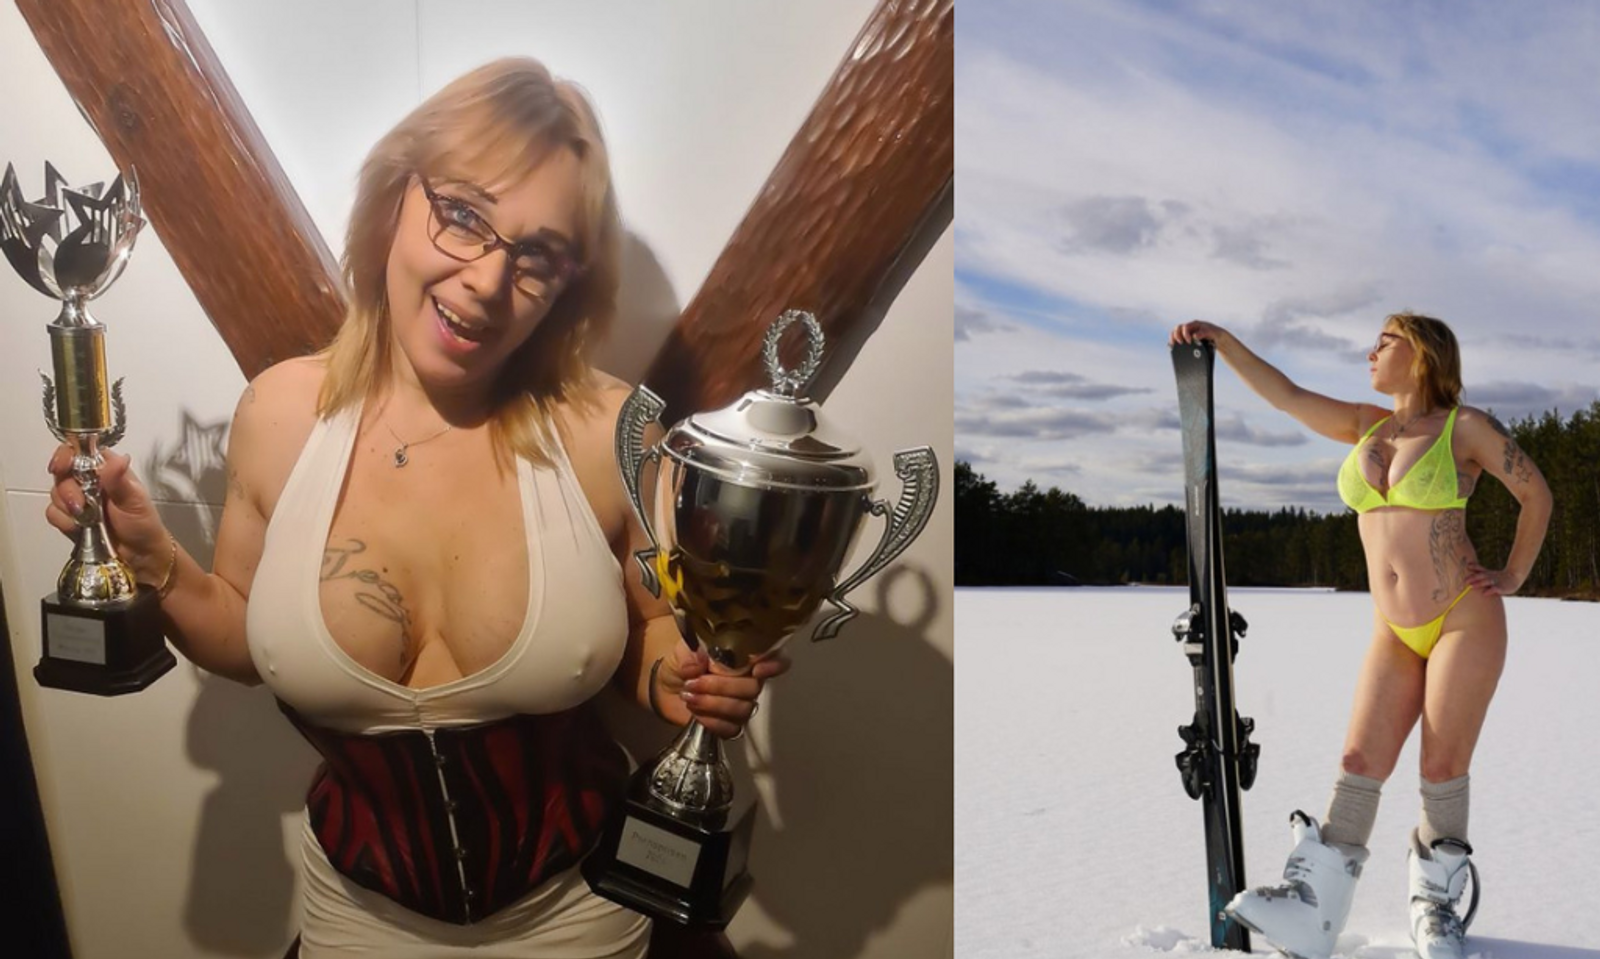 MonicaMILF Crowned as Norway's Porn Queen